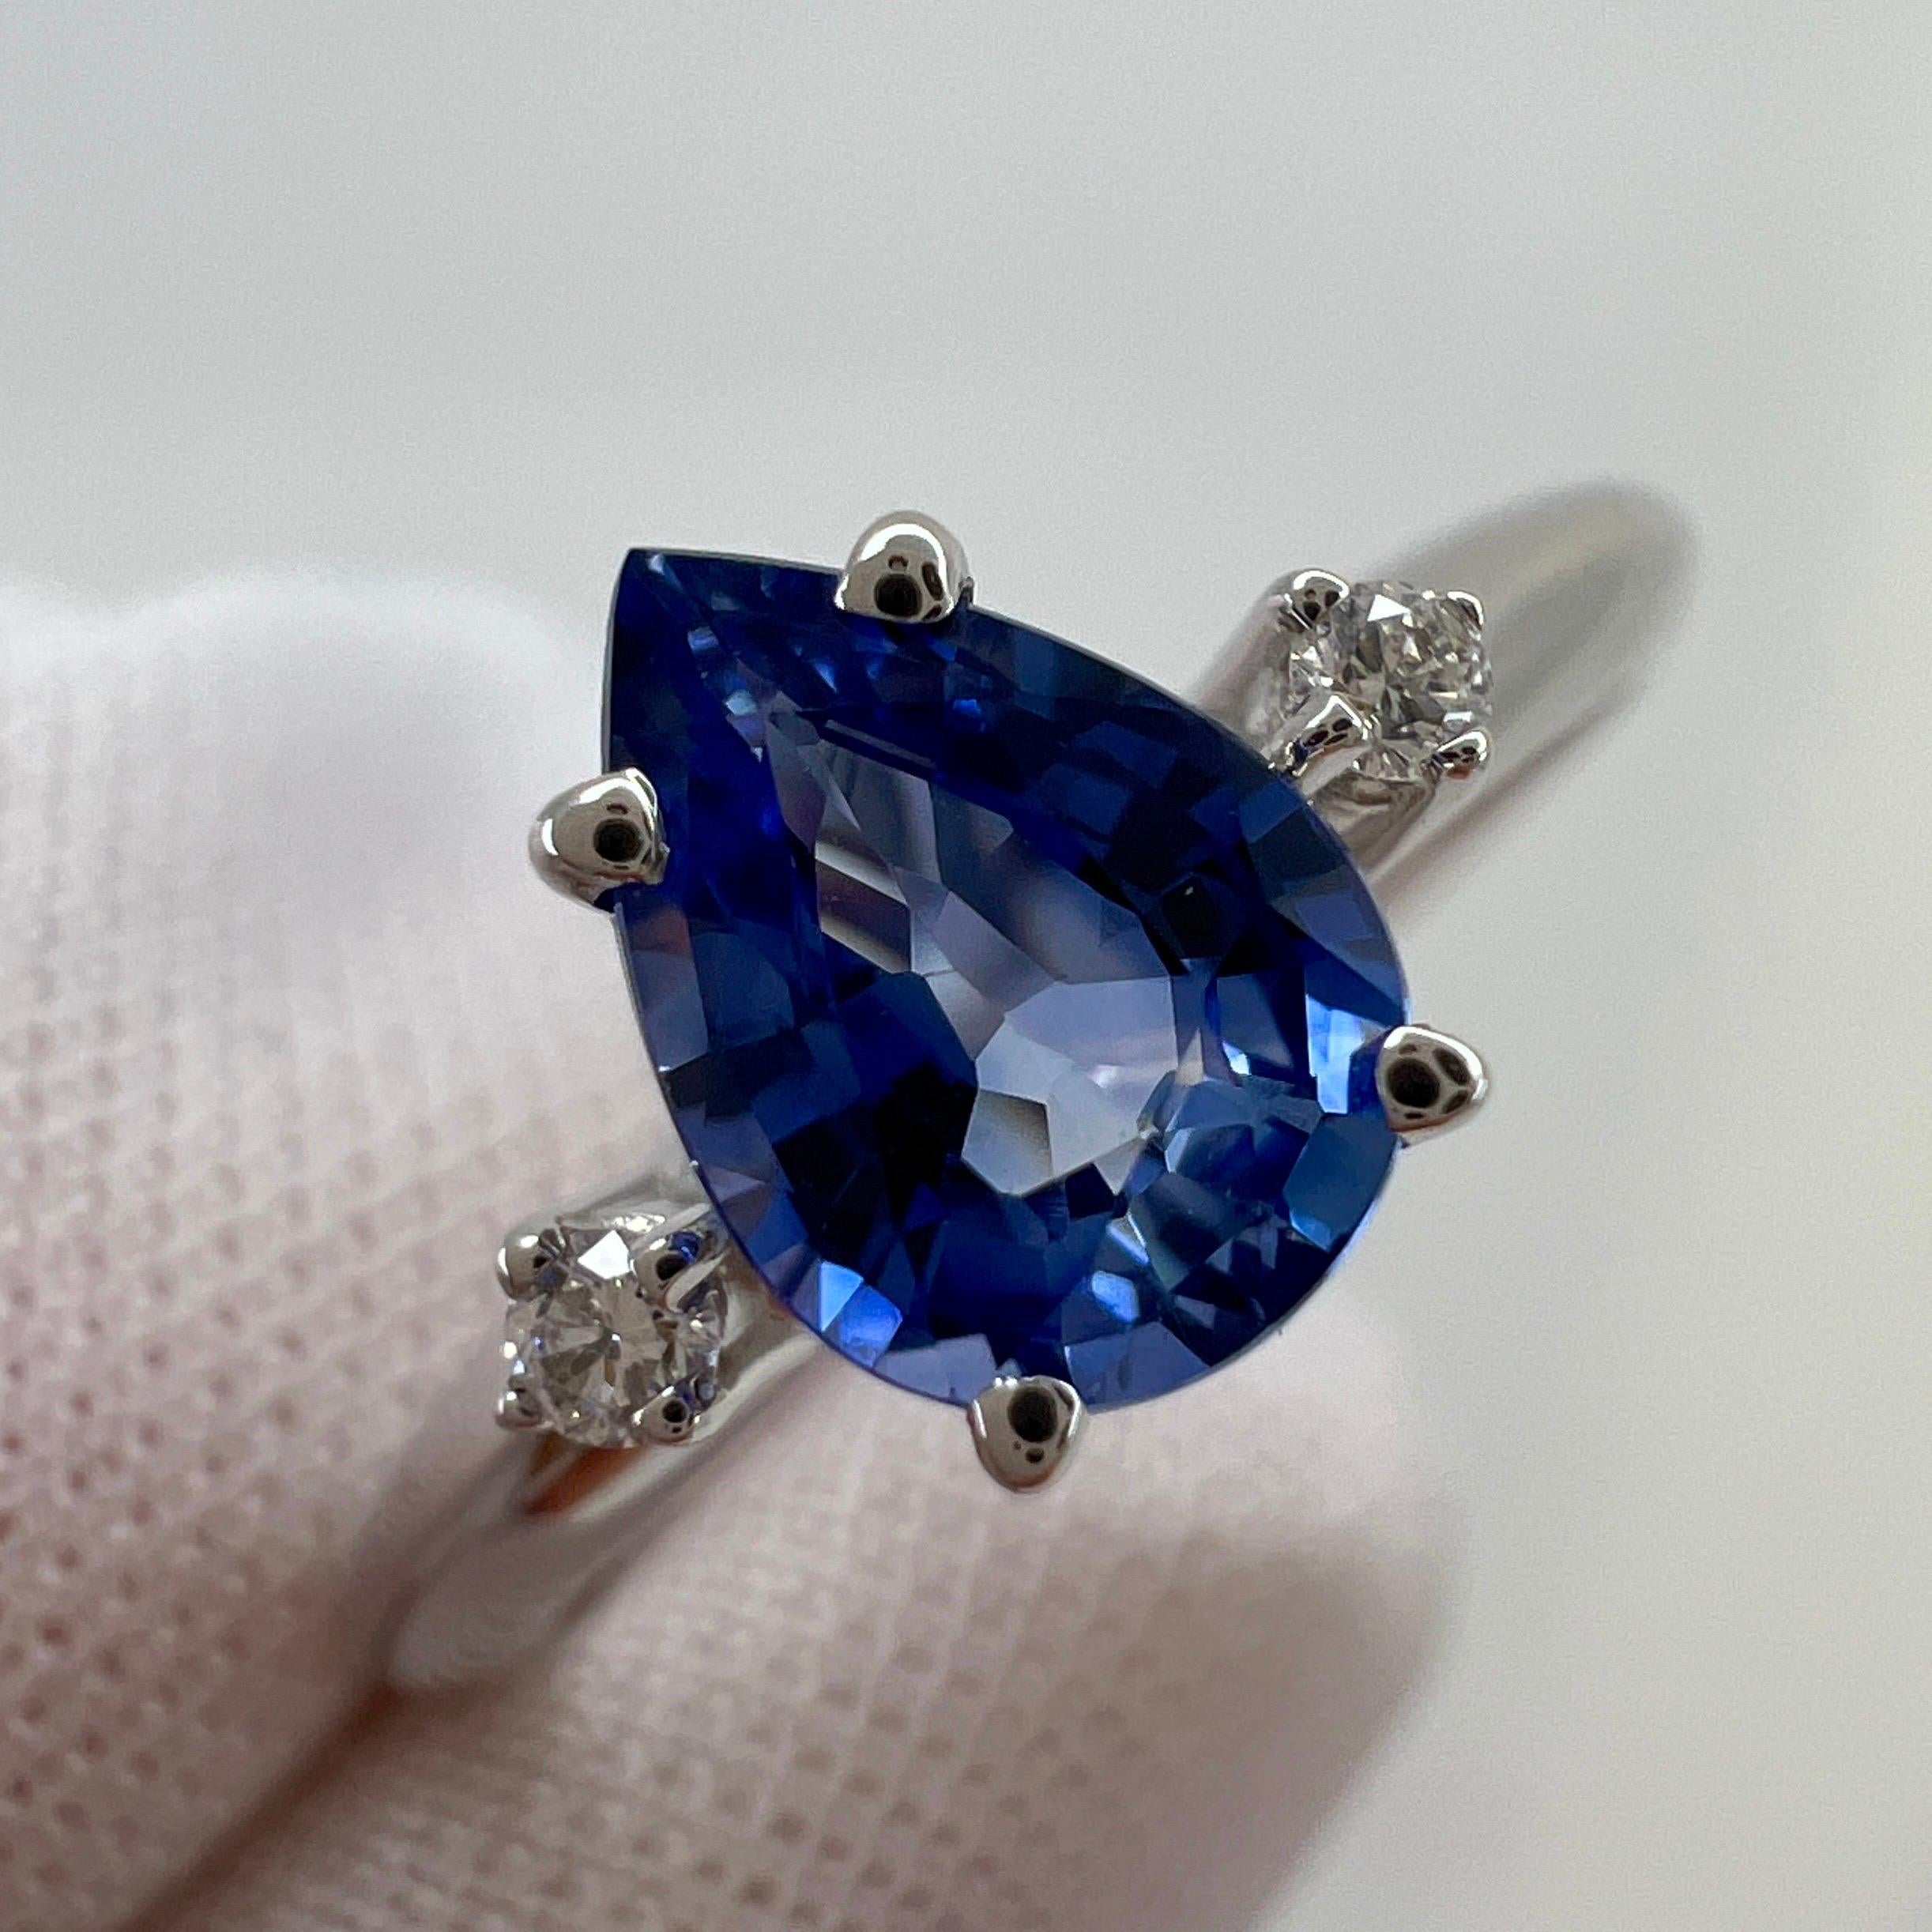 Fine Cornflower Blue Ceylon Sapphire & Diamond 18k White Gold Three Stone Ring.

1.00 Carat sapphire with a stunning vivid cornflower blue colour and excellent clarity. Very clean stone.
Also has an excellent pear cut which shows lots of sparkle and